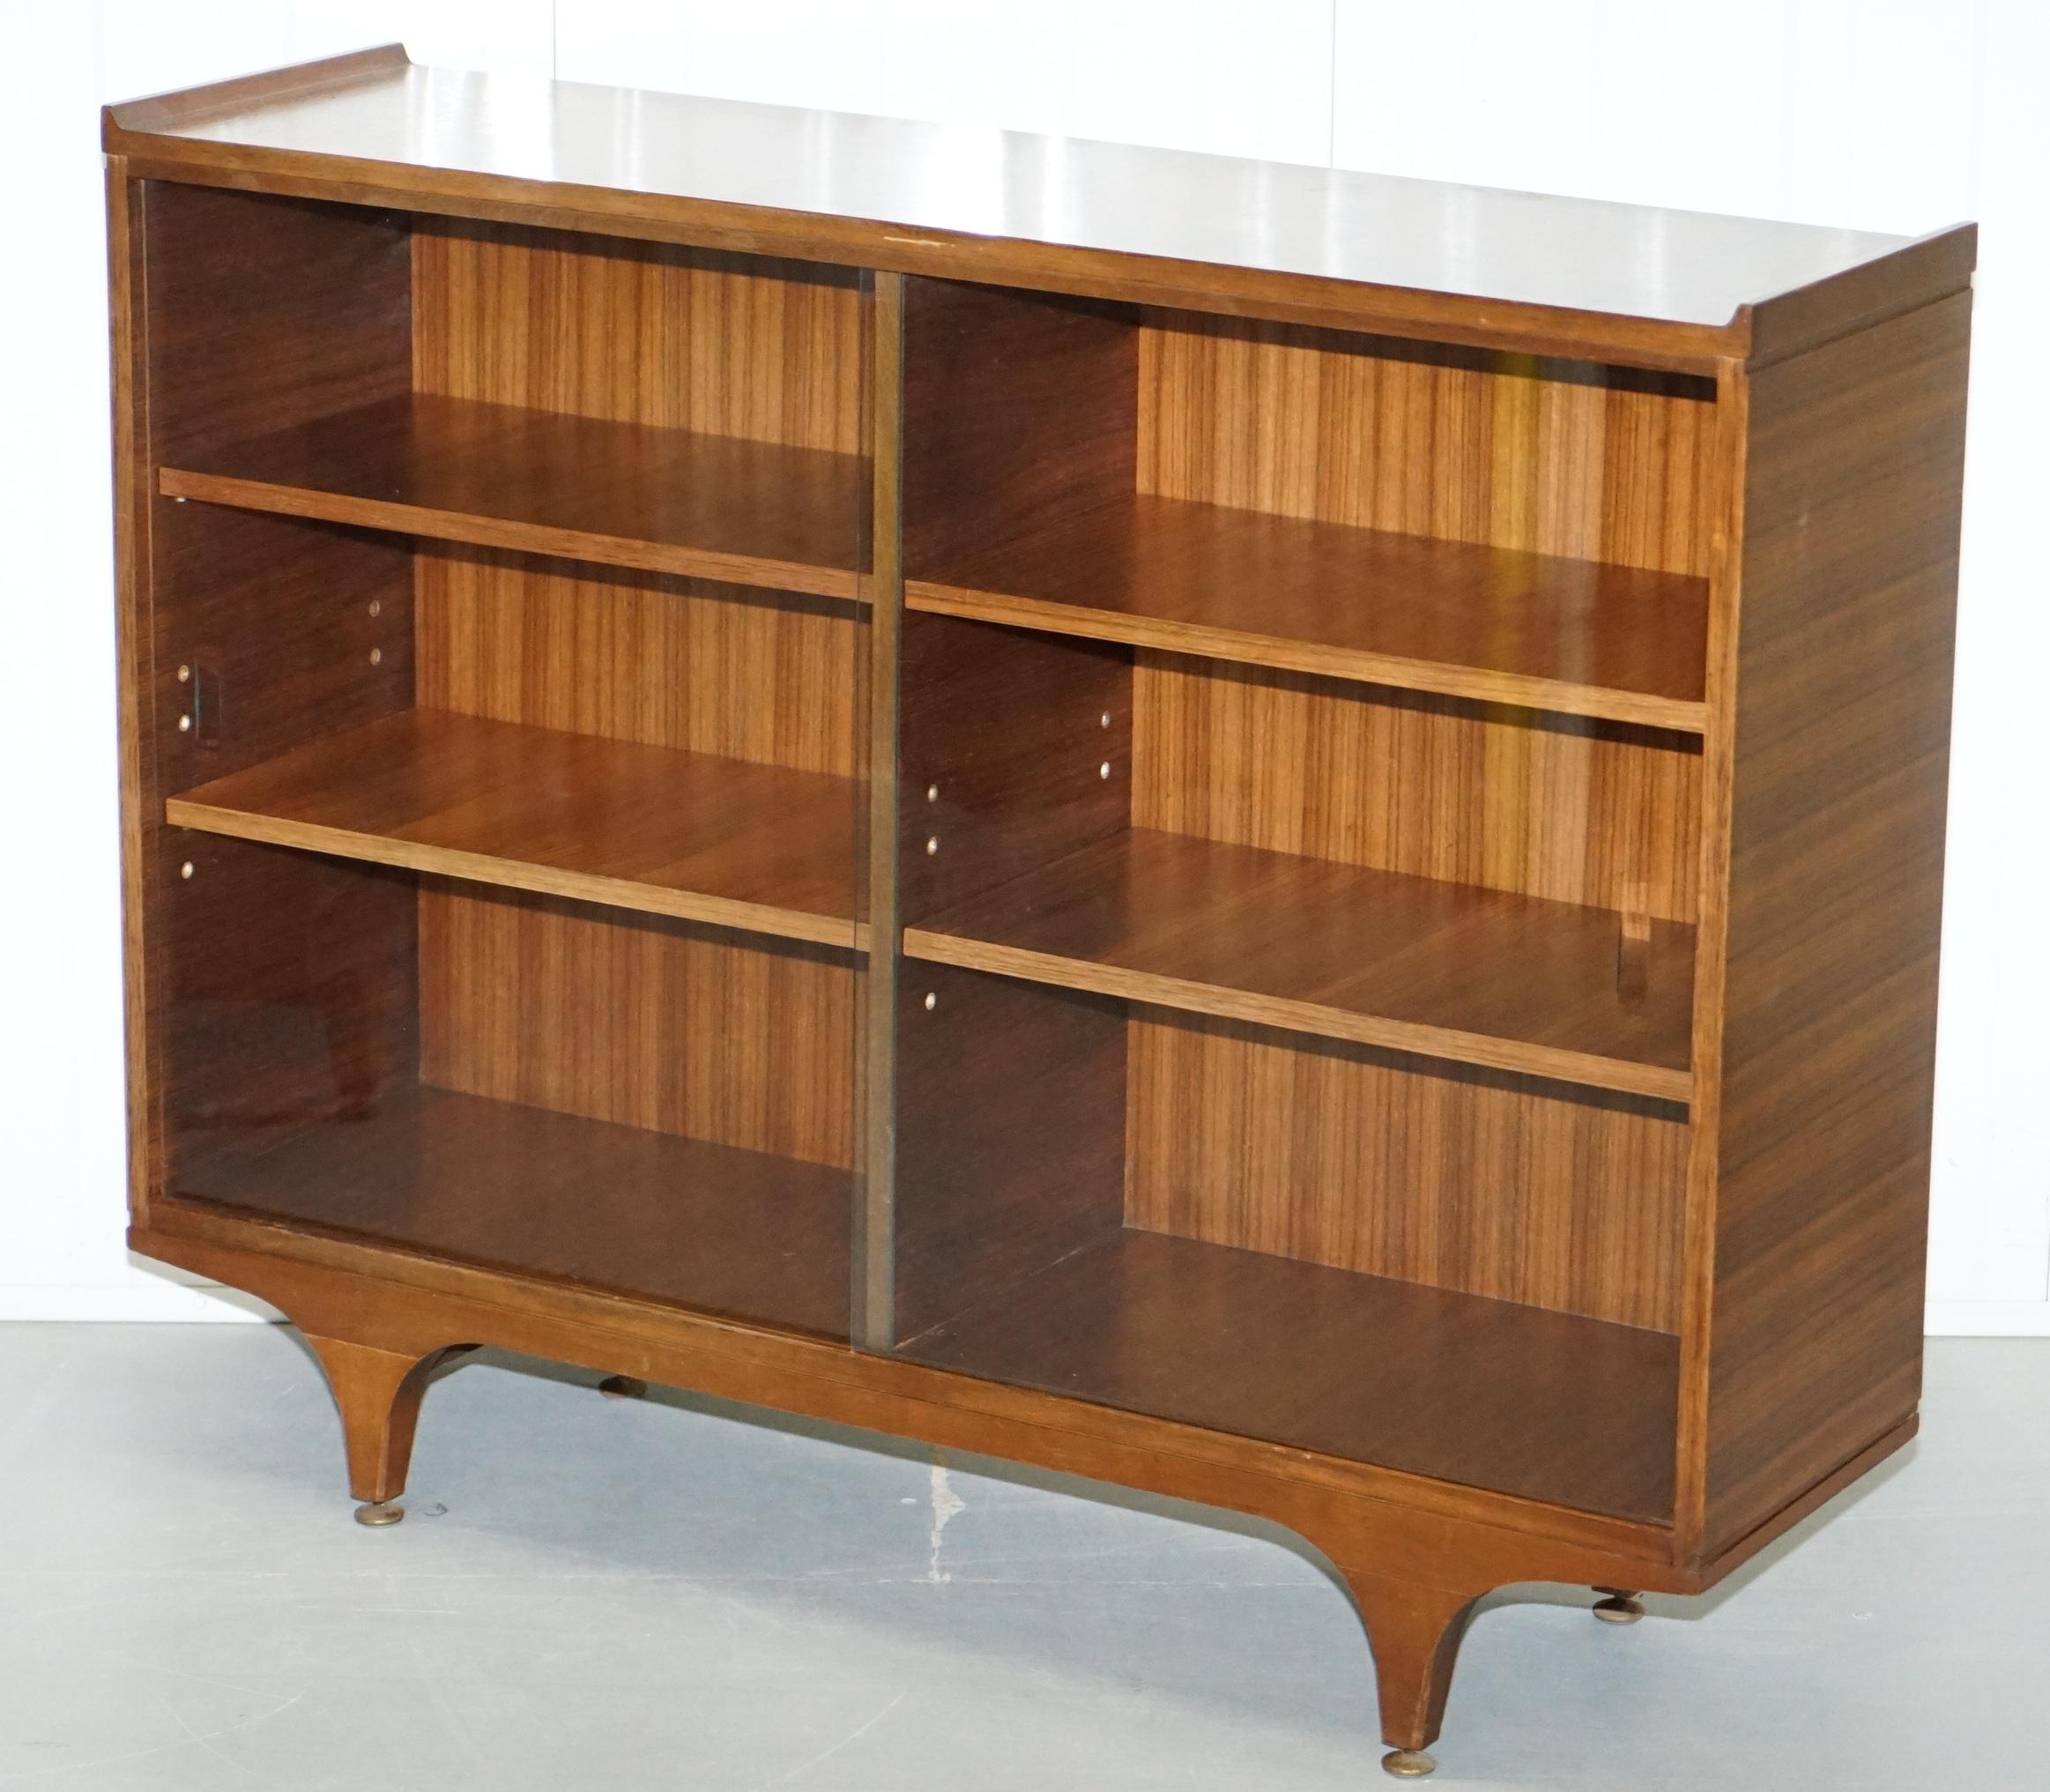 We are delighted to offer for sale this lovely pair of Mid-Century Modern teak bookcases with height adjustable shelves and glass sliding doors

A very good looking and well made paid, the legs are very stylish and sculptural, the shelves are